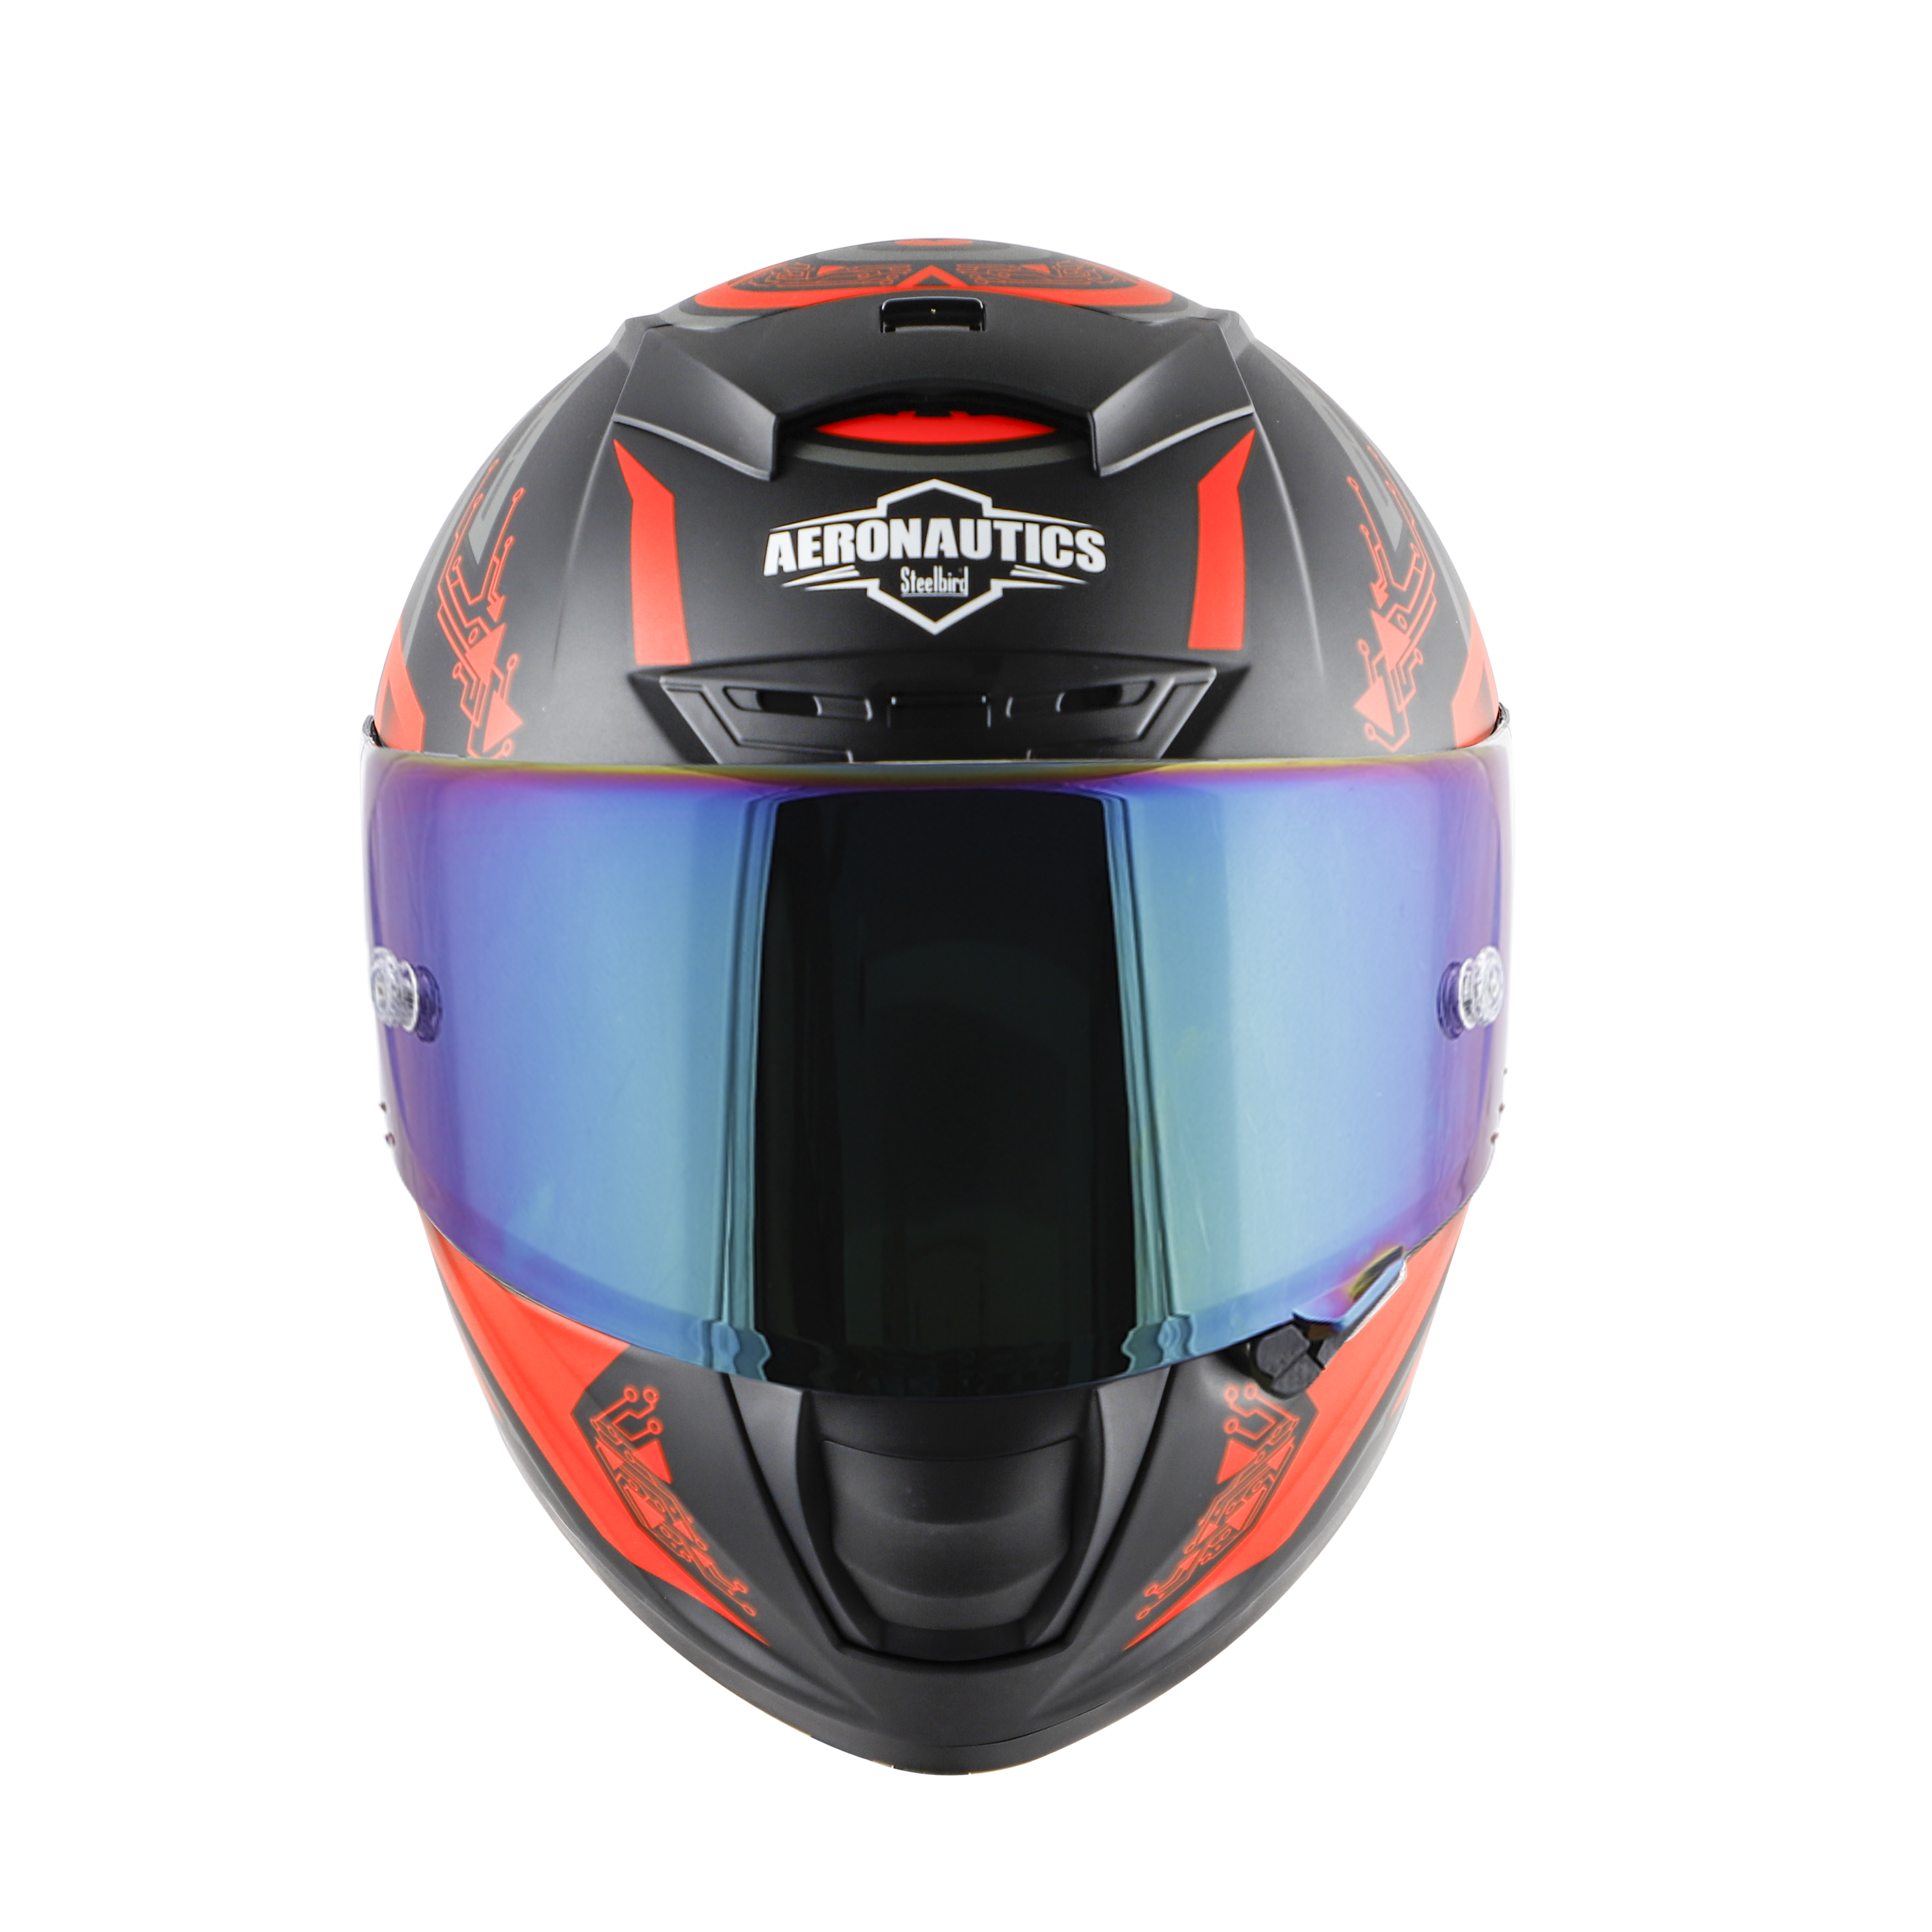 SA-2 ELECTRIC MAT BLACK WITH RED (FITTED WITH CLEAR VISOR EXTRA RAINBOW CHROME VISOR FREE WITH ANTI-FOG SHIELD HOLDER)